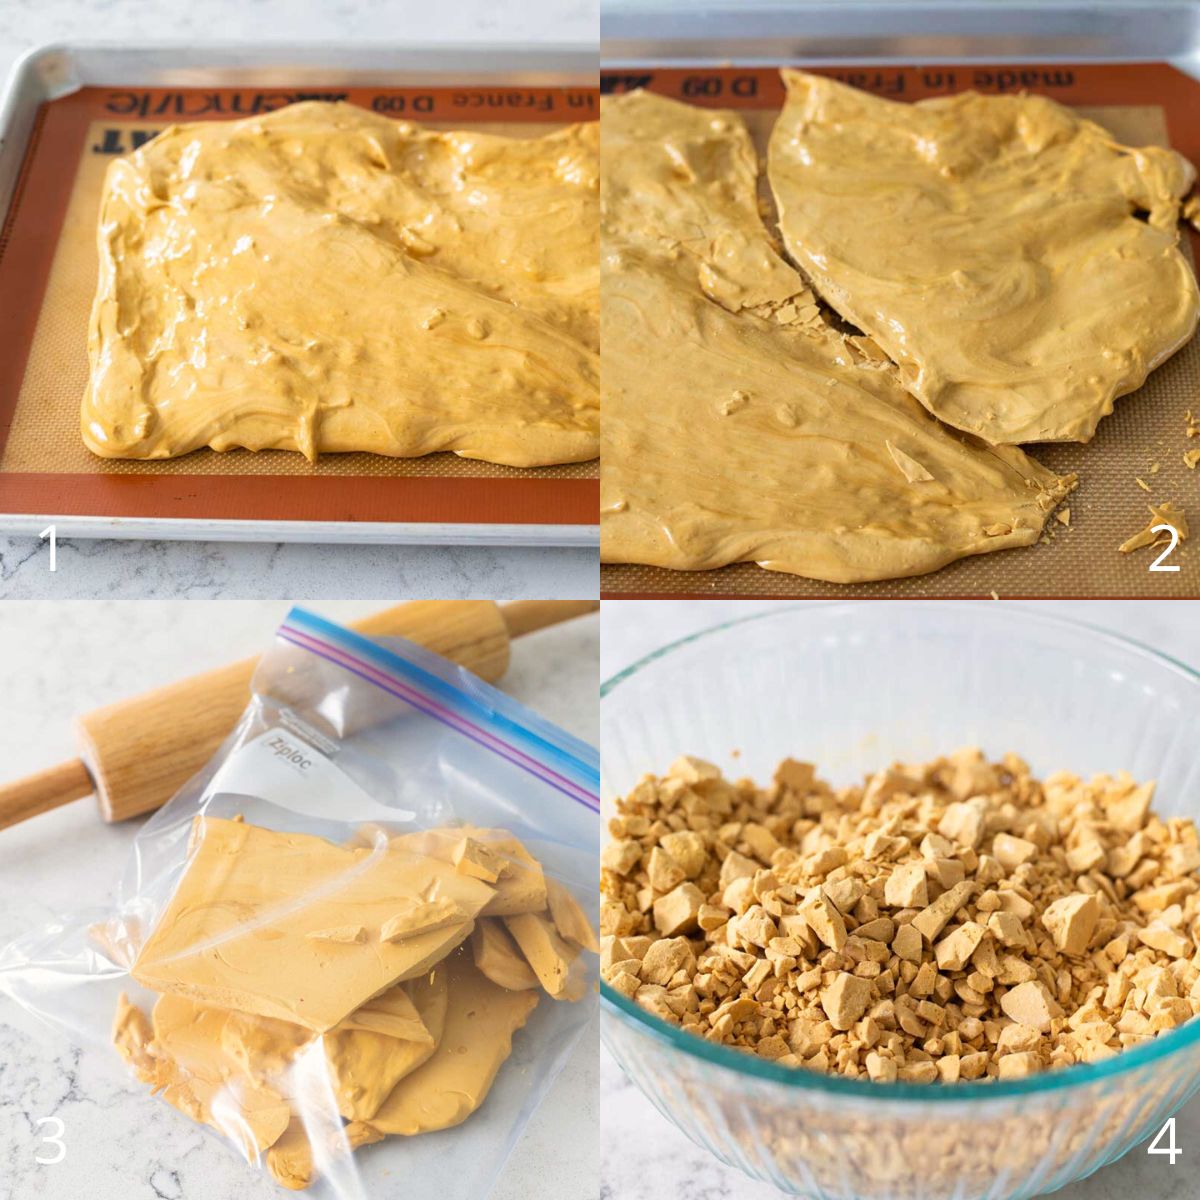 The step by step photos show how to break the candy into crunchy pieces.